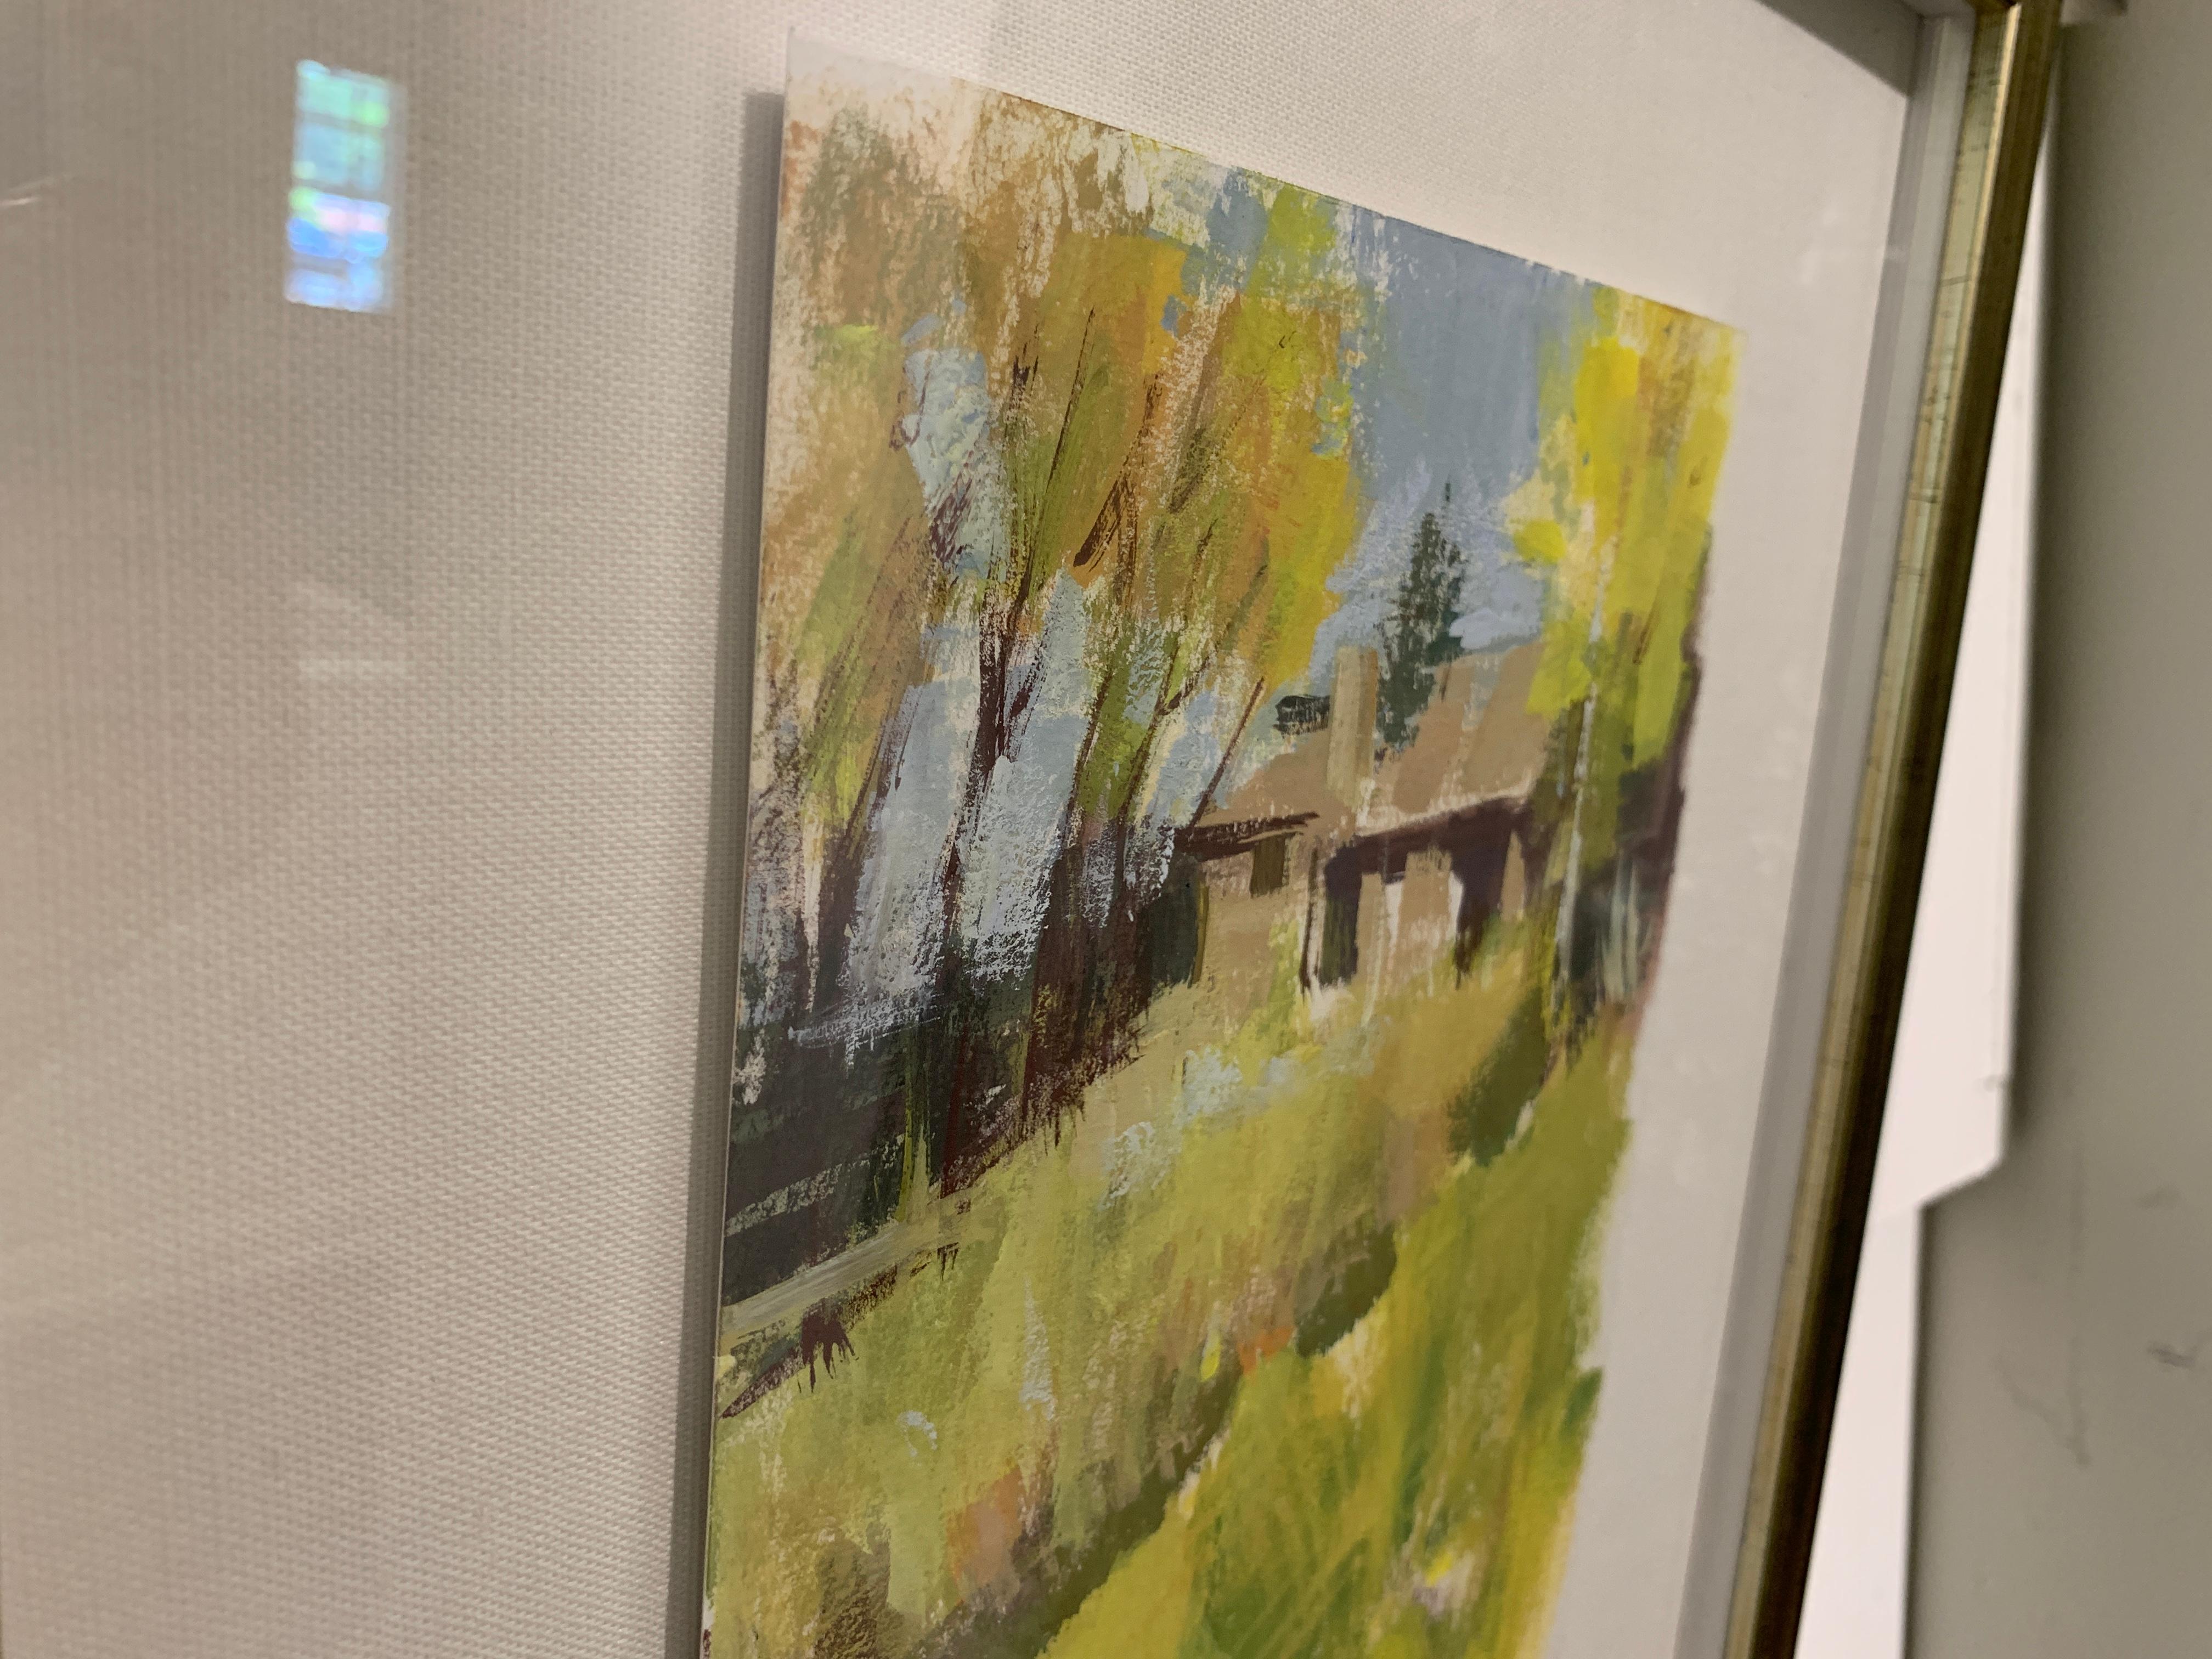 'Le Printemps' is a small framed acrylic on Arches cold press paper Impressionist landscape painting created by American artist Nancy Franke in 2019. Featuring a palette made of yellow, green and blue tones among others, this painting depicts a